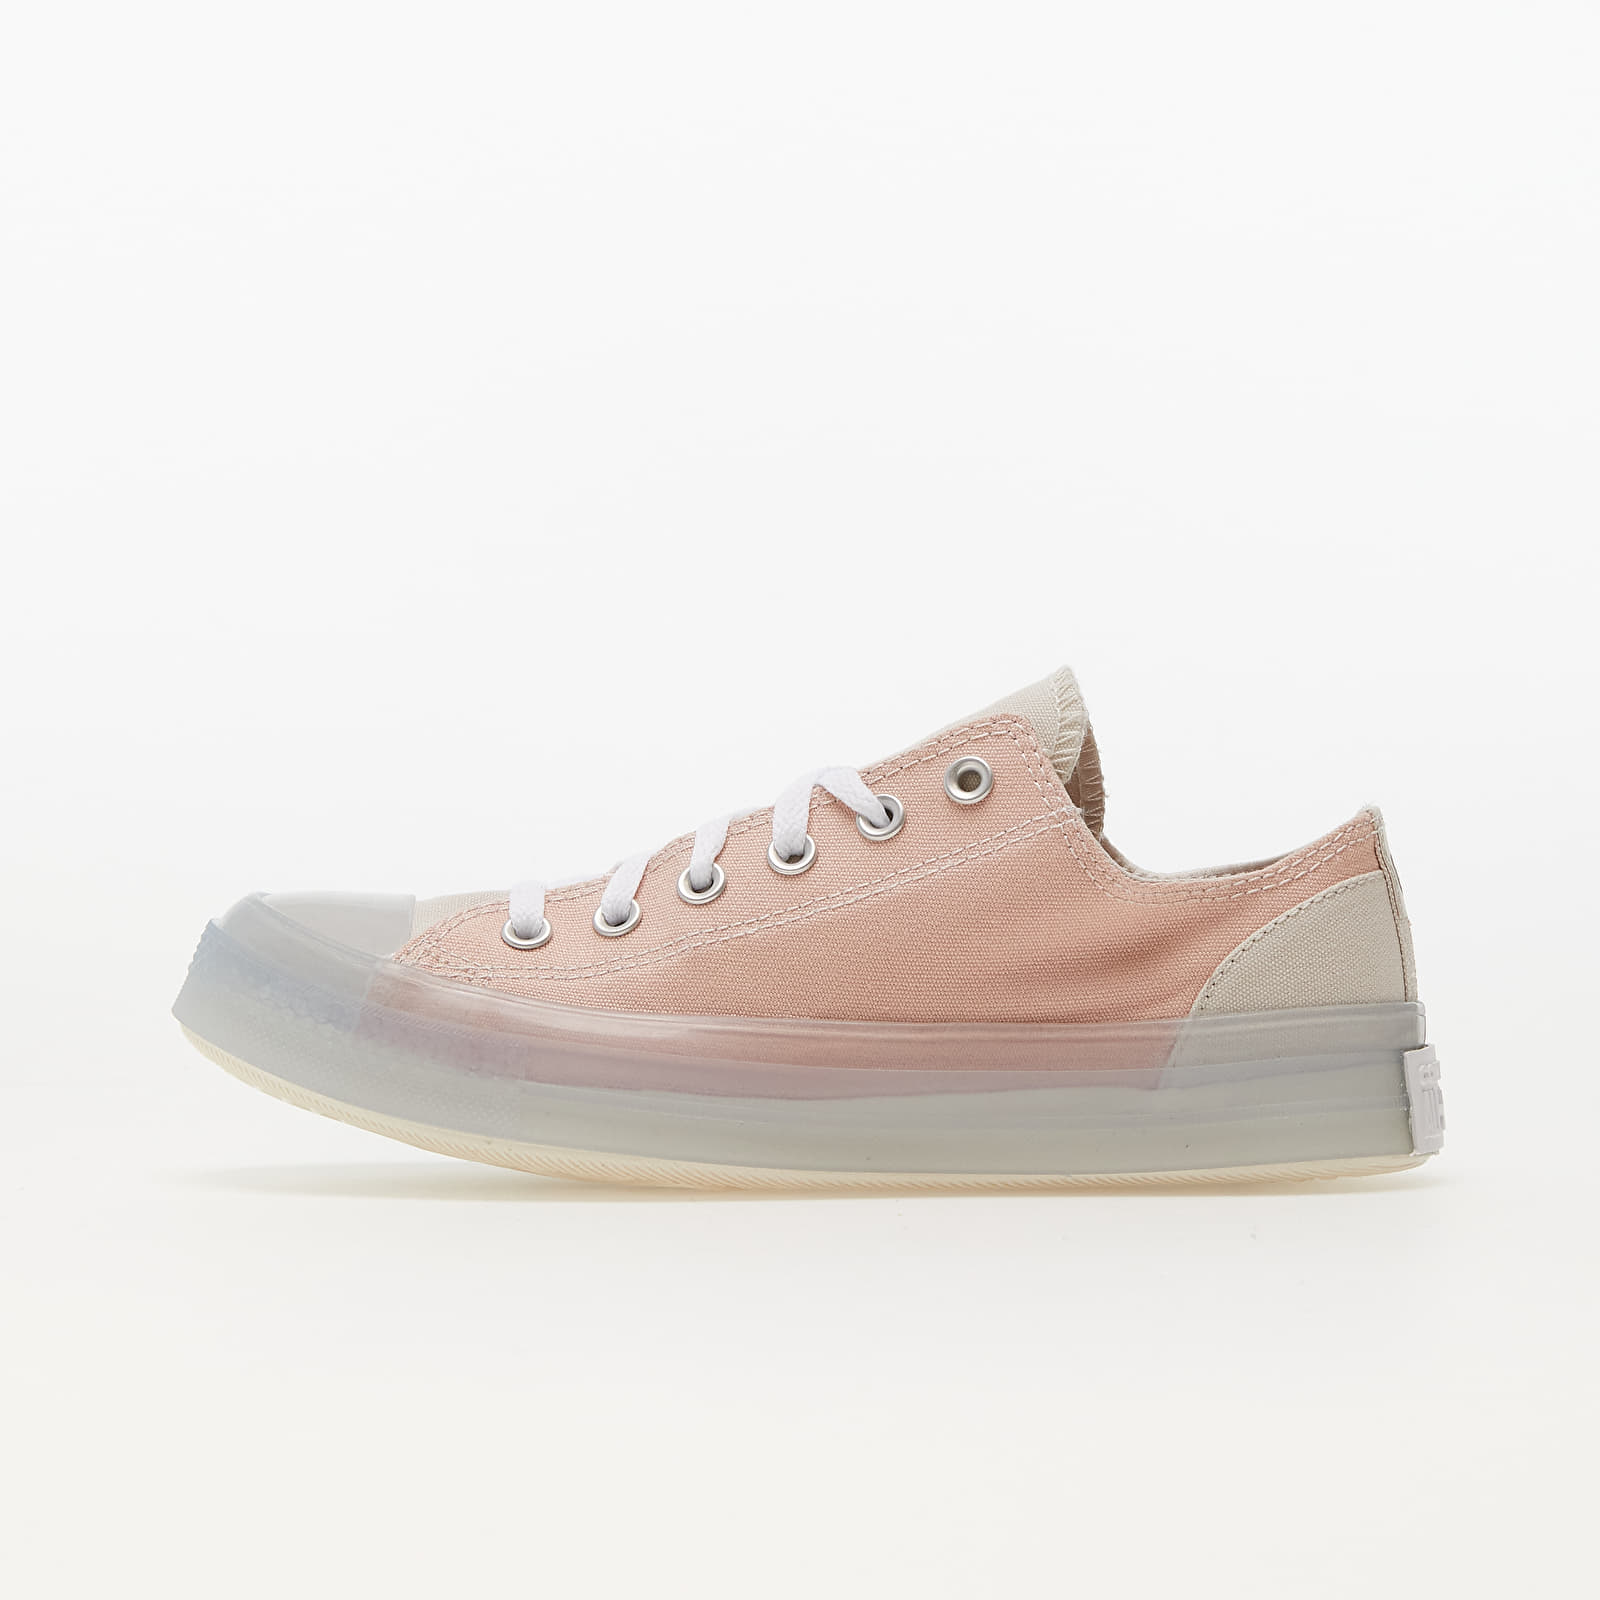 Men's shoes Converse Chuck Taylor All Star Cx Stretch Canvas Pink Clay/ Desert Sand/ Egret